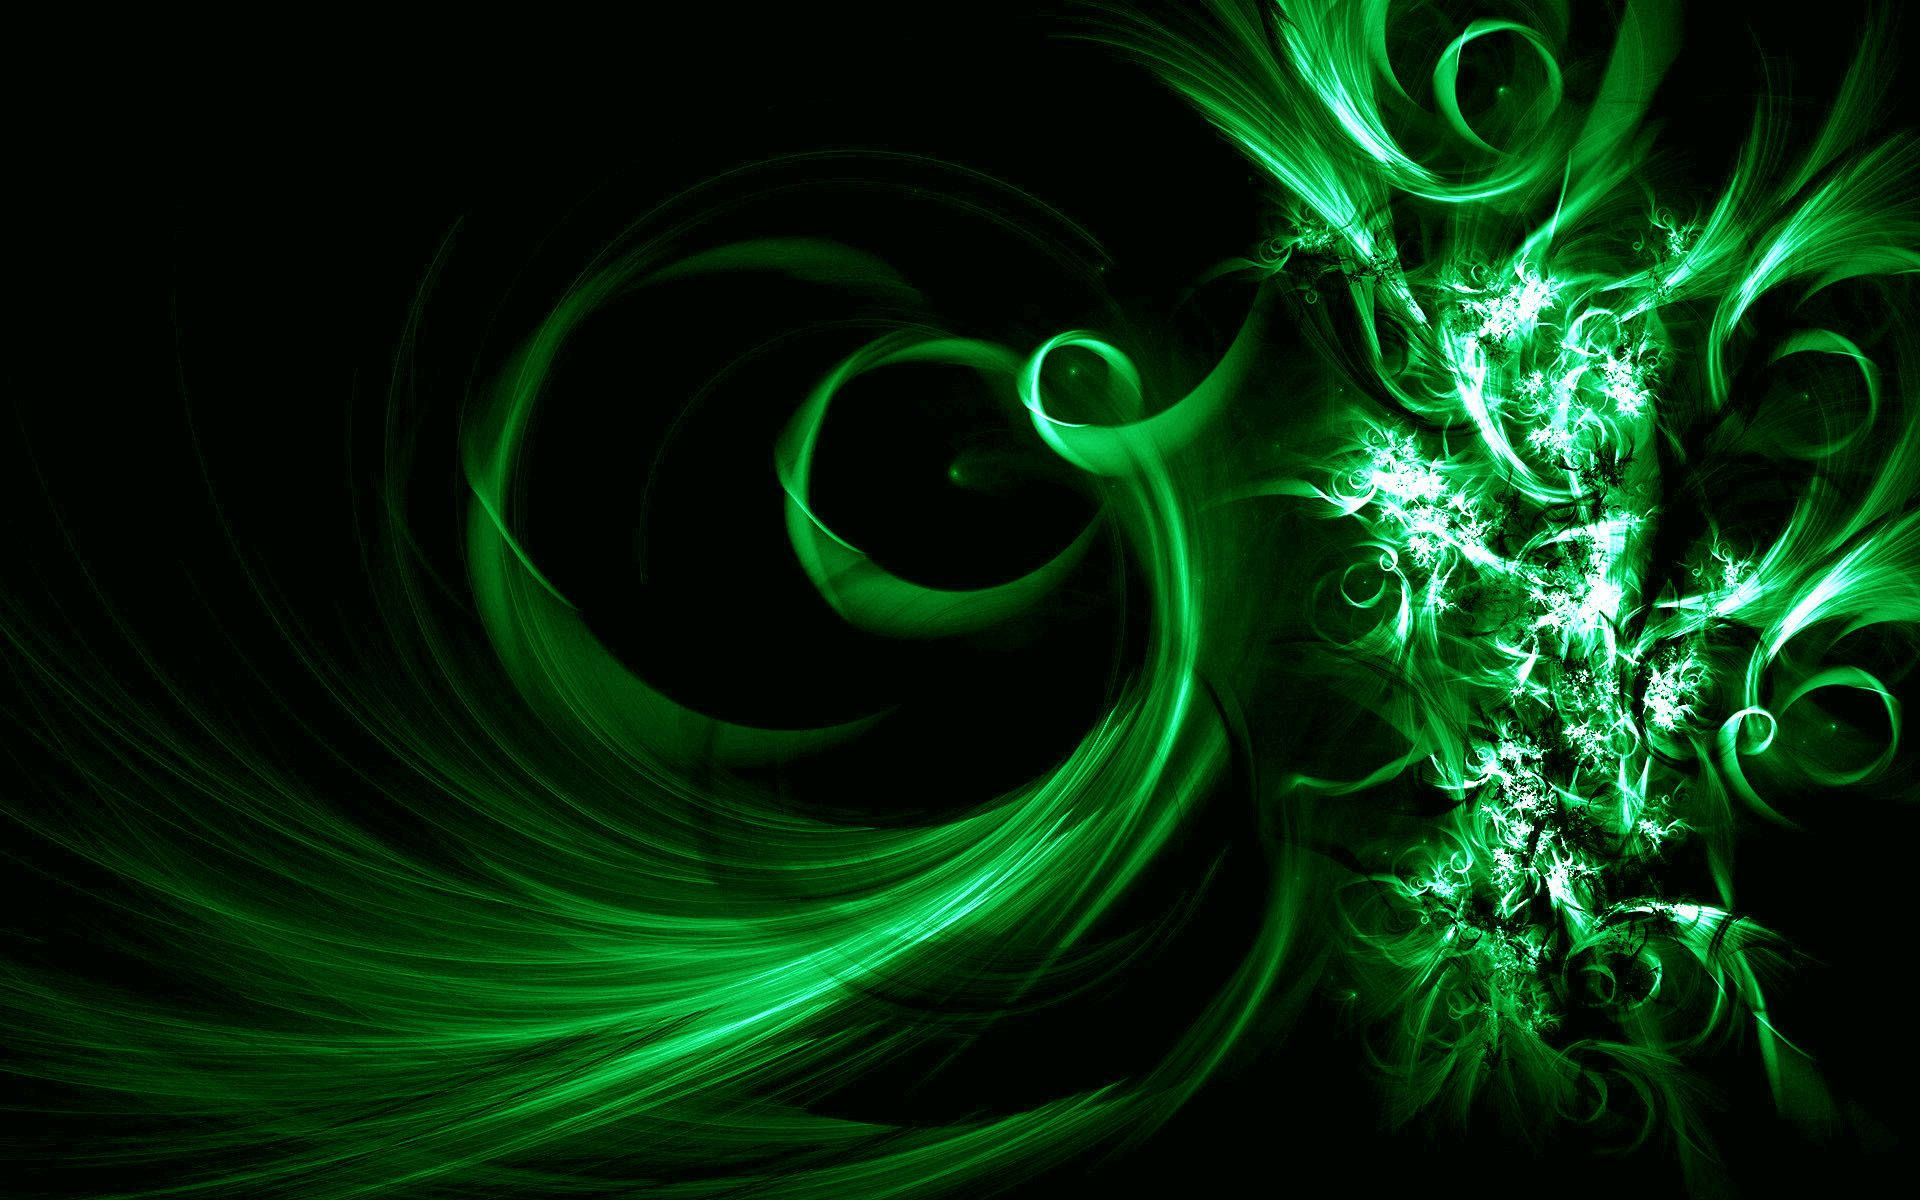 Glowing Green Spiral Abstract